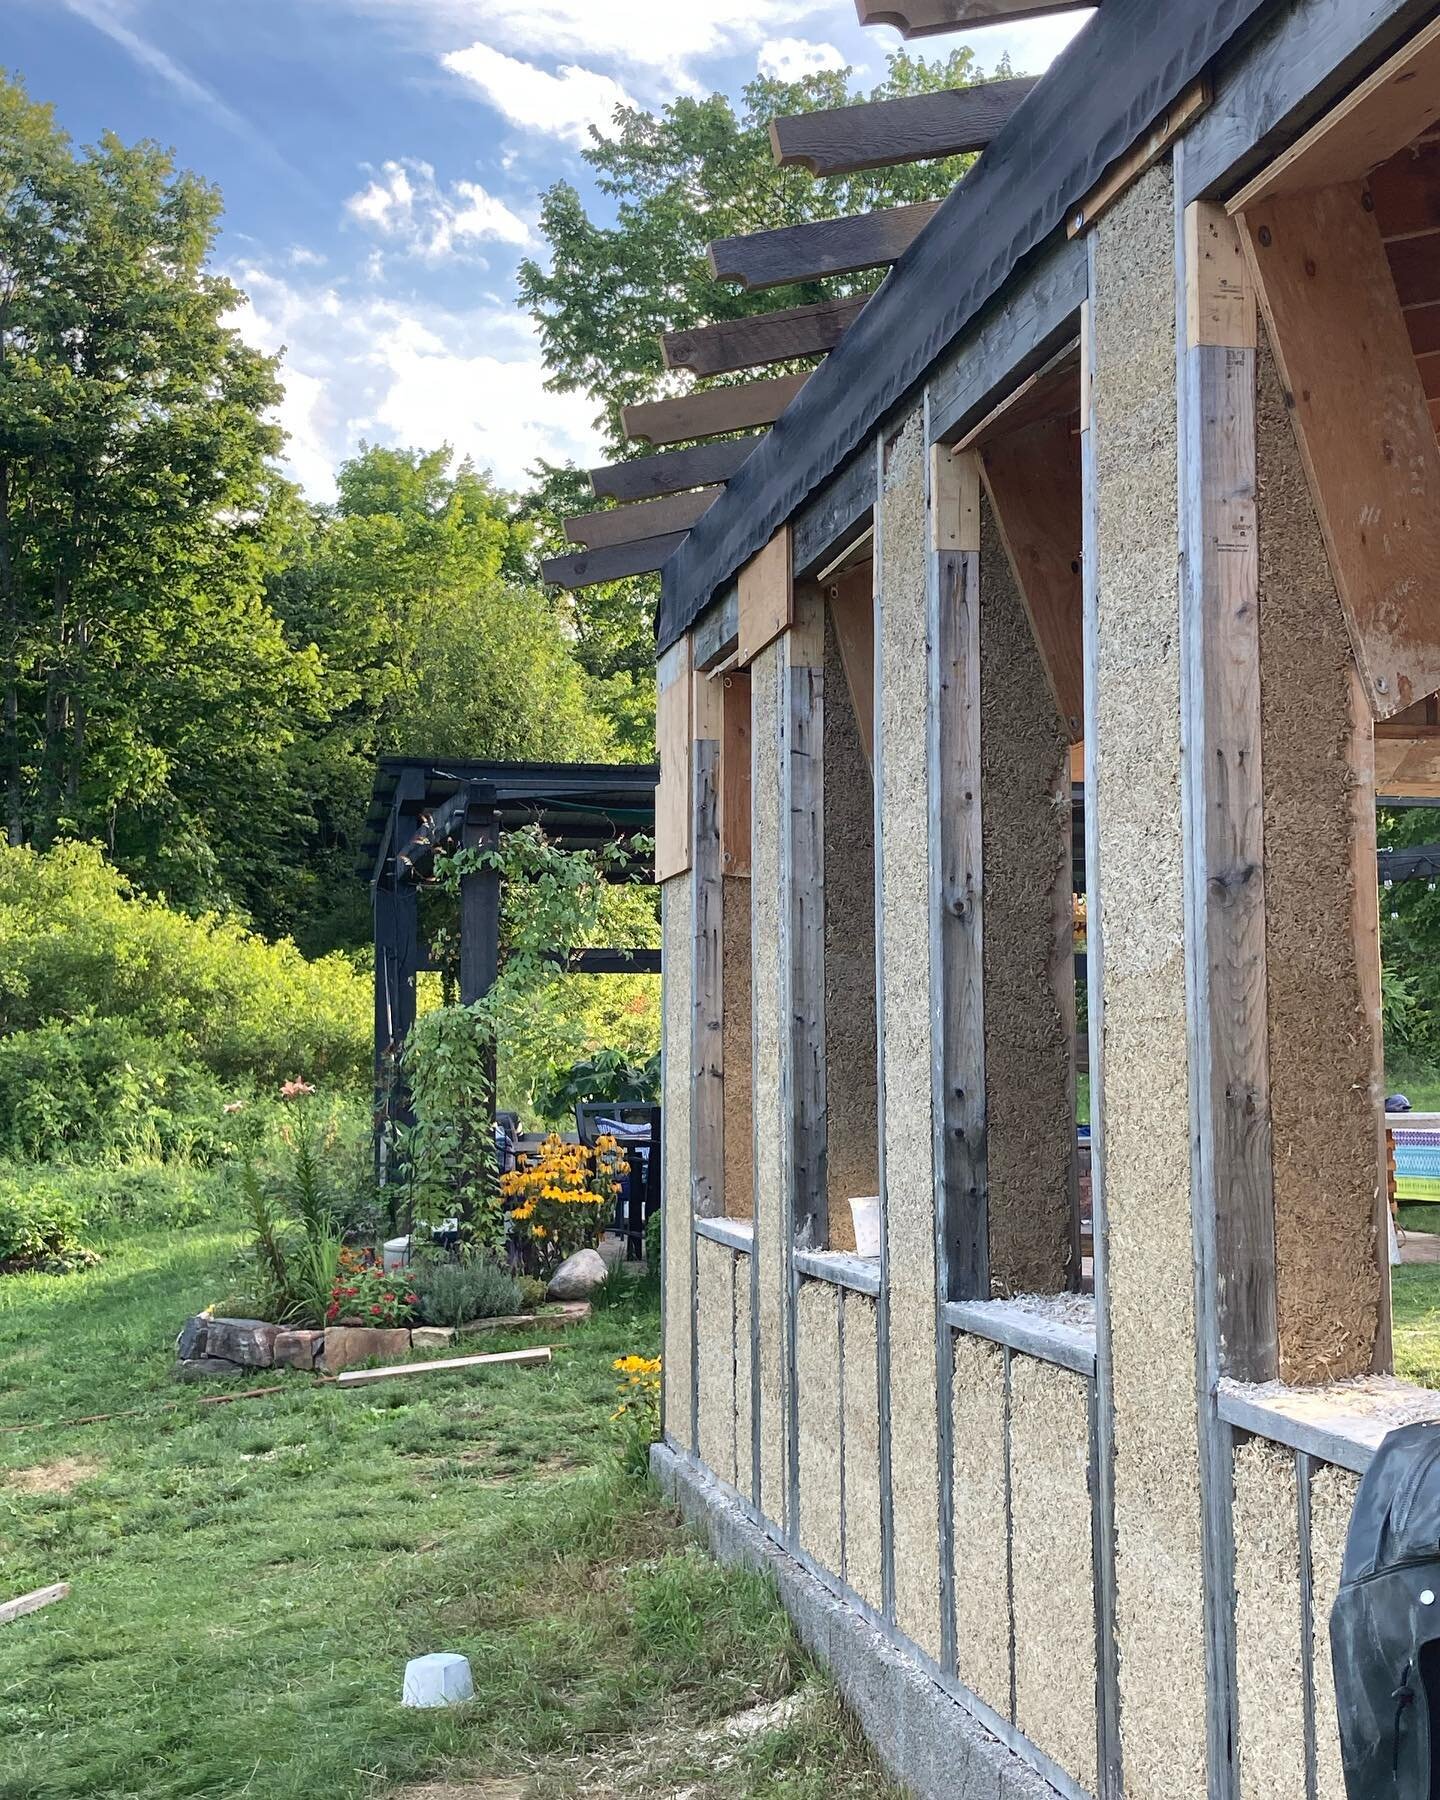 We have been installing hempcrete for the past week. Thanks so much to all the volunteers that came out! Such a fun work experience, such a great wall system!